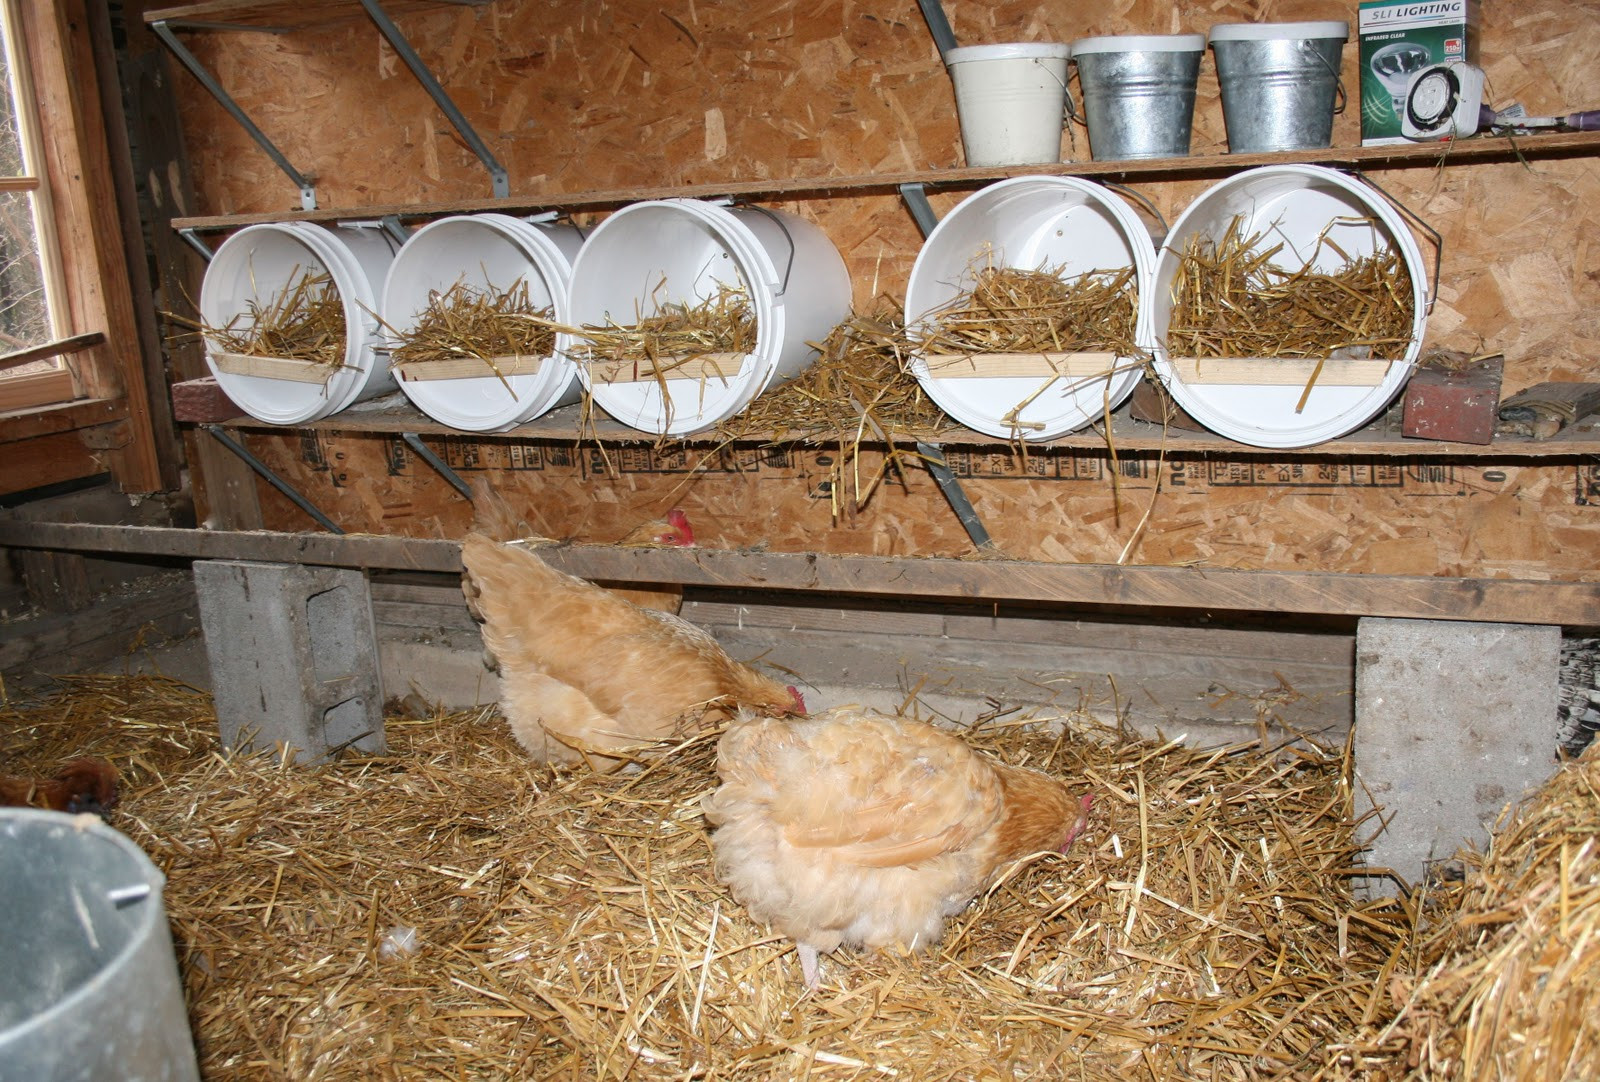 The Best Ideas for Diy Nesting Boxes for Chickens - Diy Nesting Boxes For Chickens Best Of 5 Gallon Buckets For Nests Page 3 Of Diy Nesting Boxes For Chickens